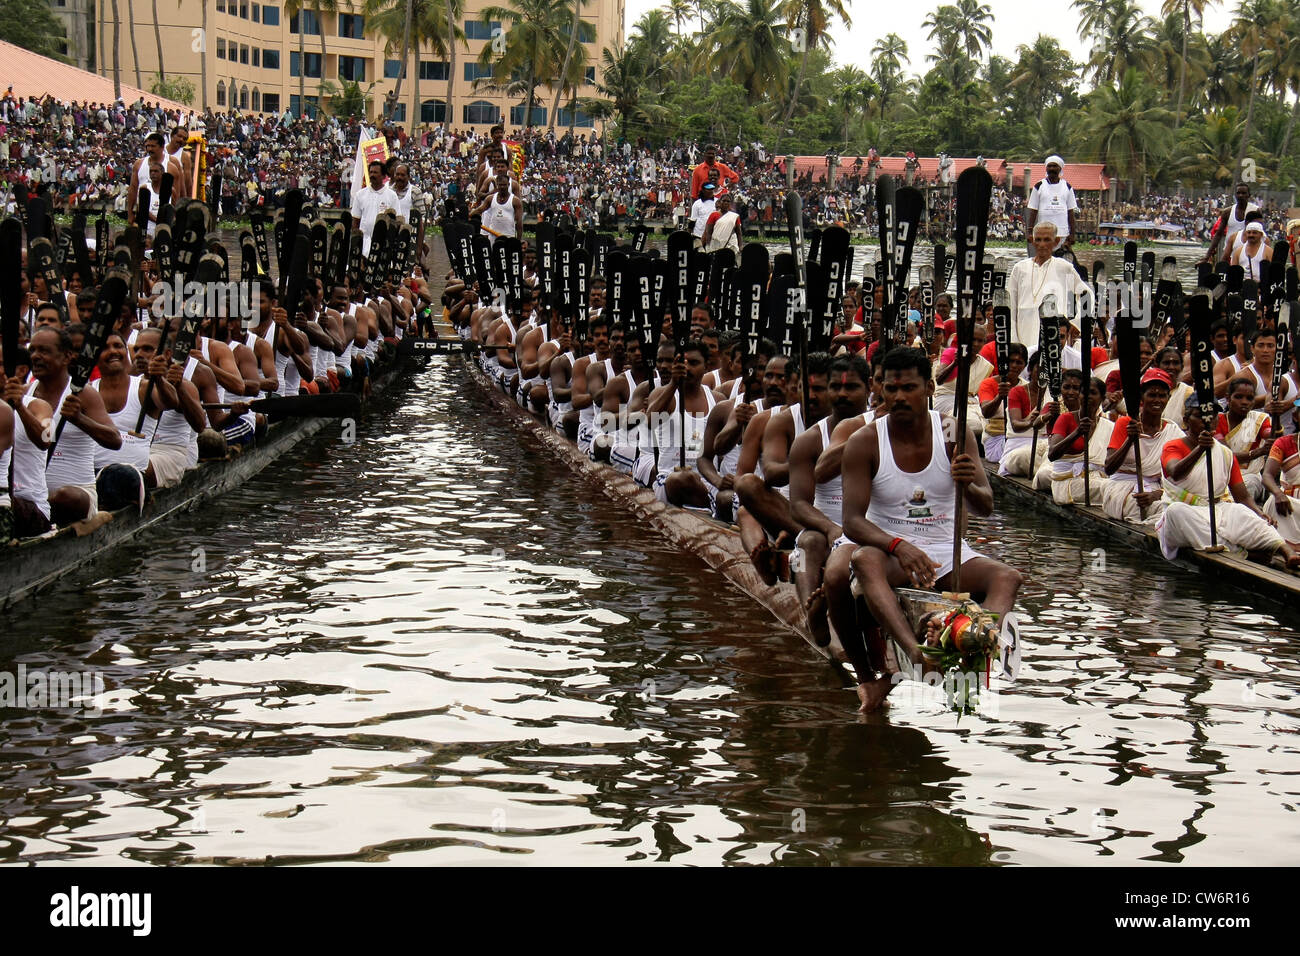 rowers doing mass drill during nehru trophy snake boat race or chundan vallam race in alappuzha formerly known  alleppey,kerala,snake boat race,kerala Stock Photo